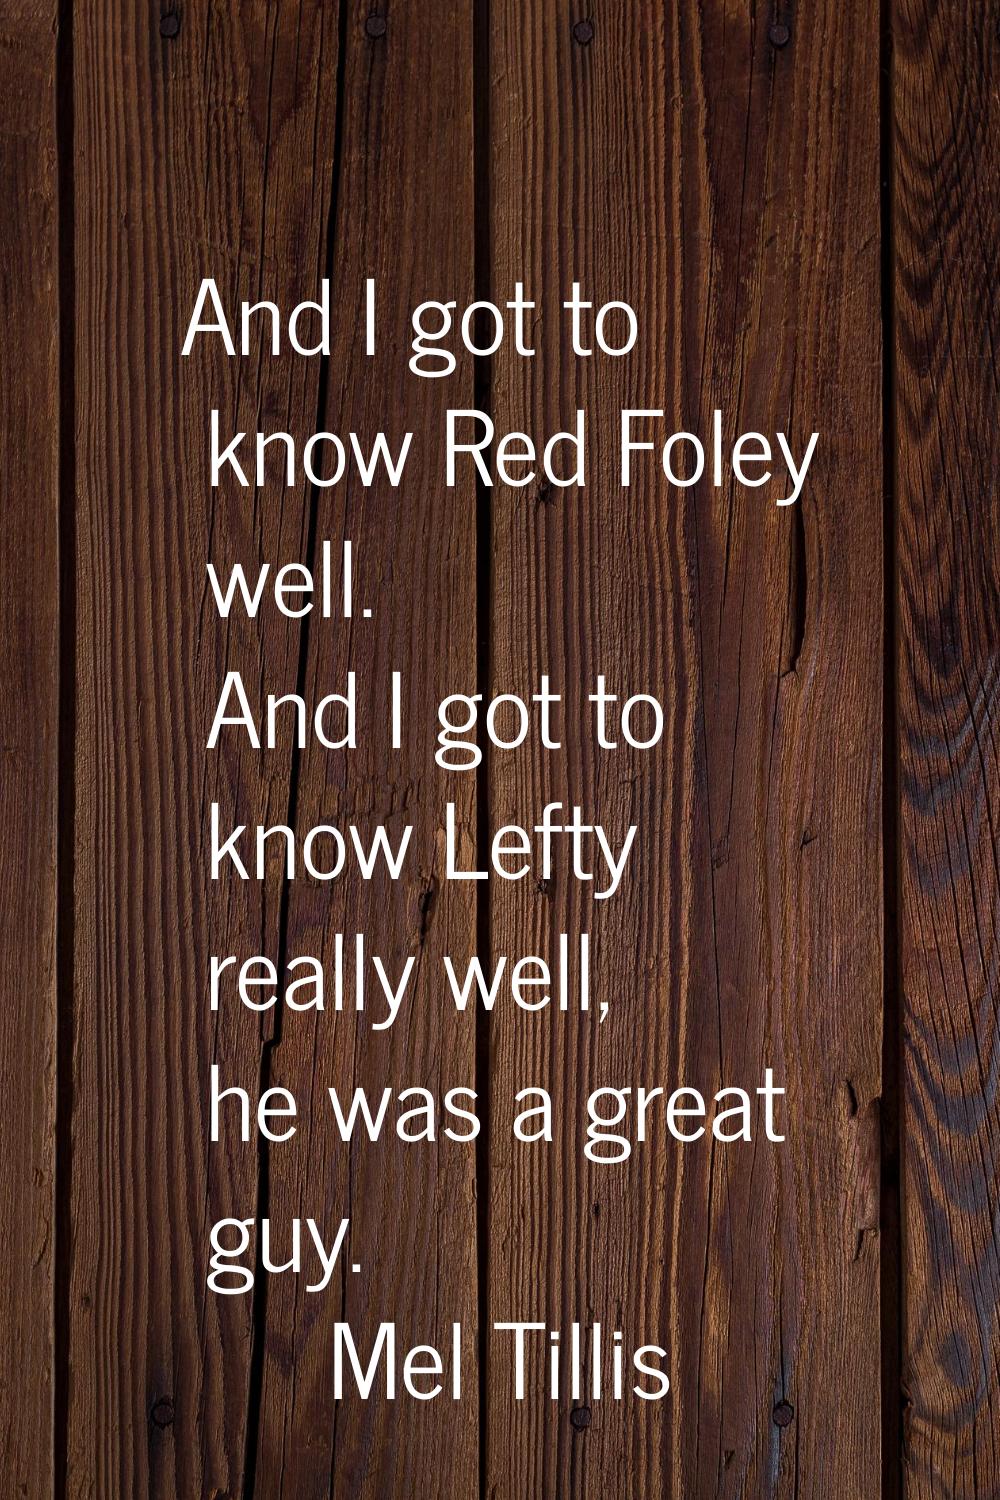 And I got to know Red Foley well. And I got to know Lefty really well, he was a great guy.